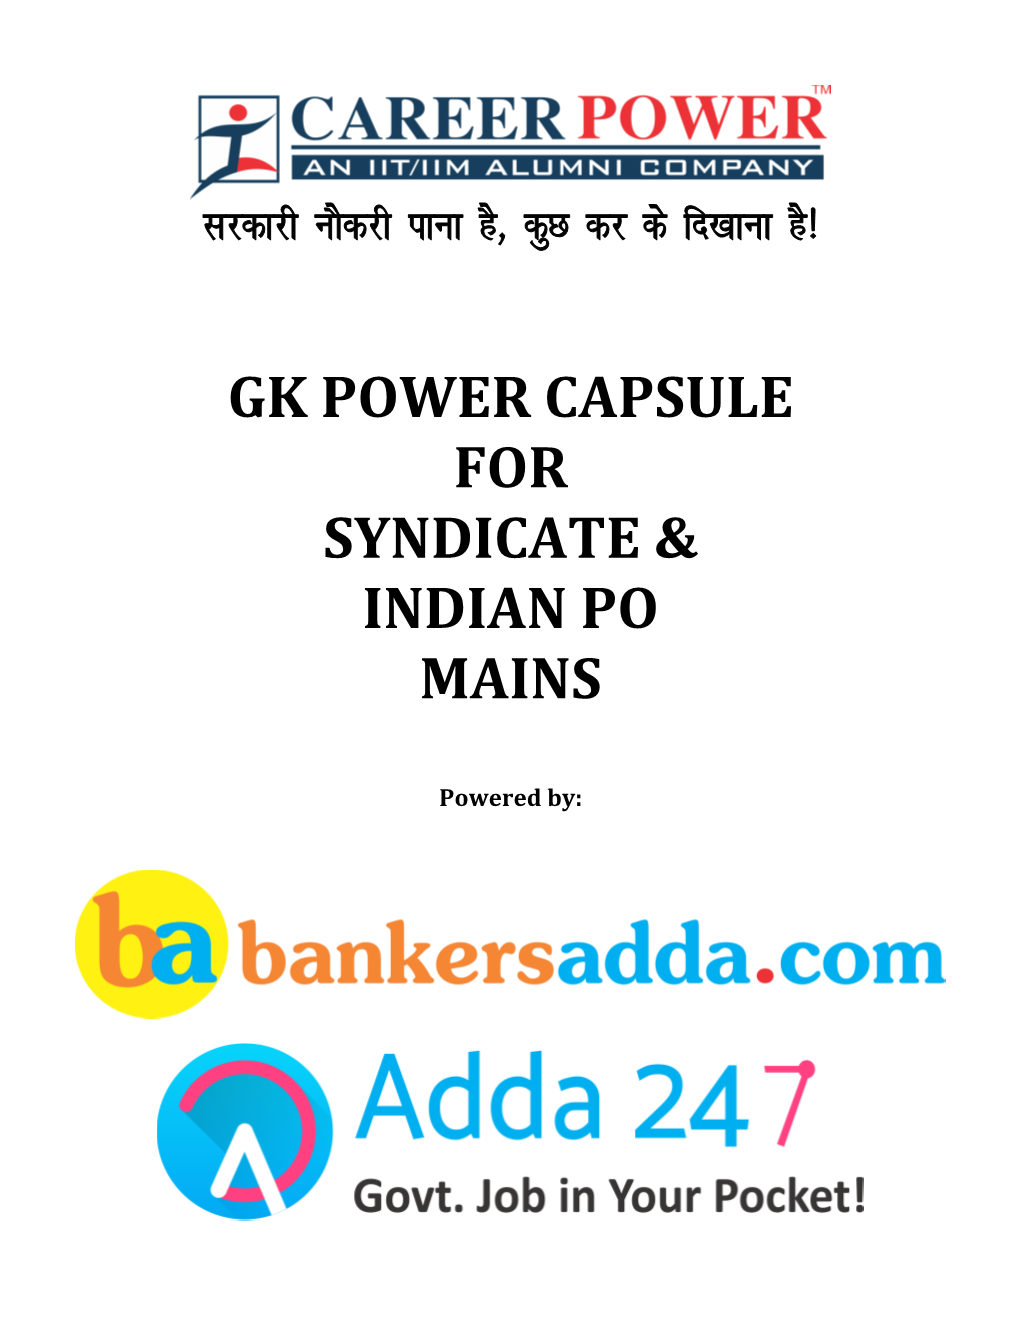 Gk Power Capsule for Syndicate & Indian Po Mains